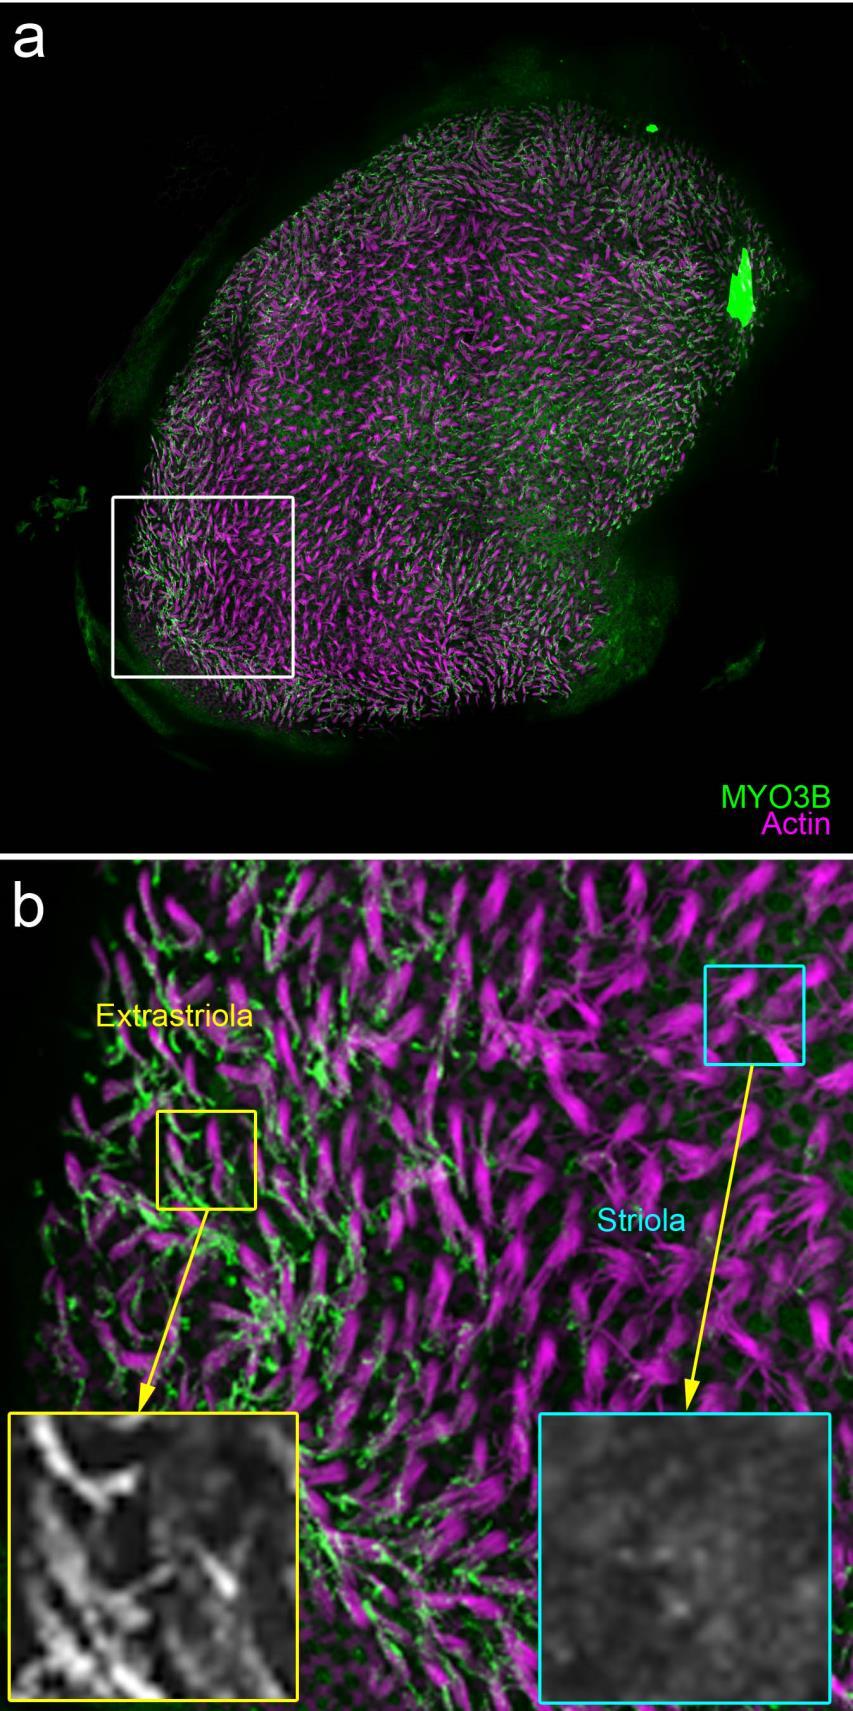 Supplementary Figure 4. High-resolution view of MYO3B in the extrastriolar region of the utricle. Same figure layout as Supplementary Figure 3.